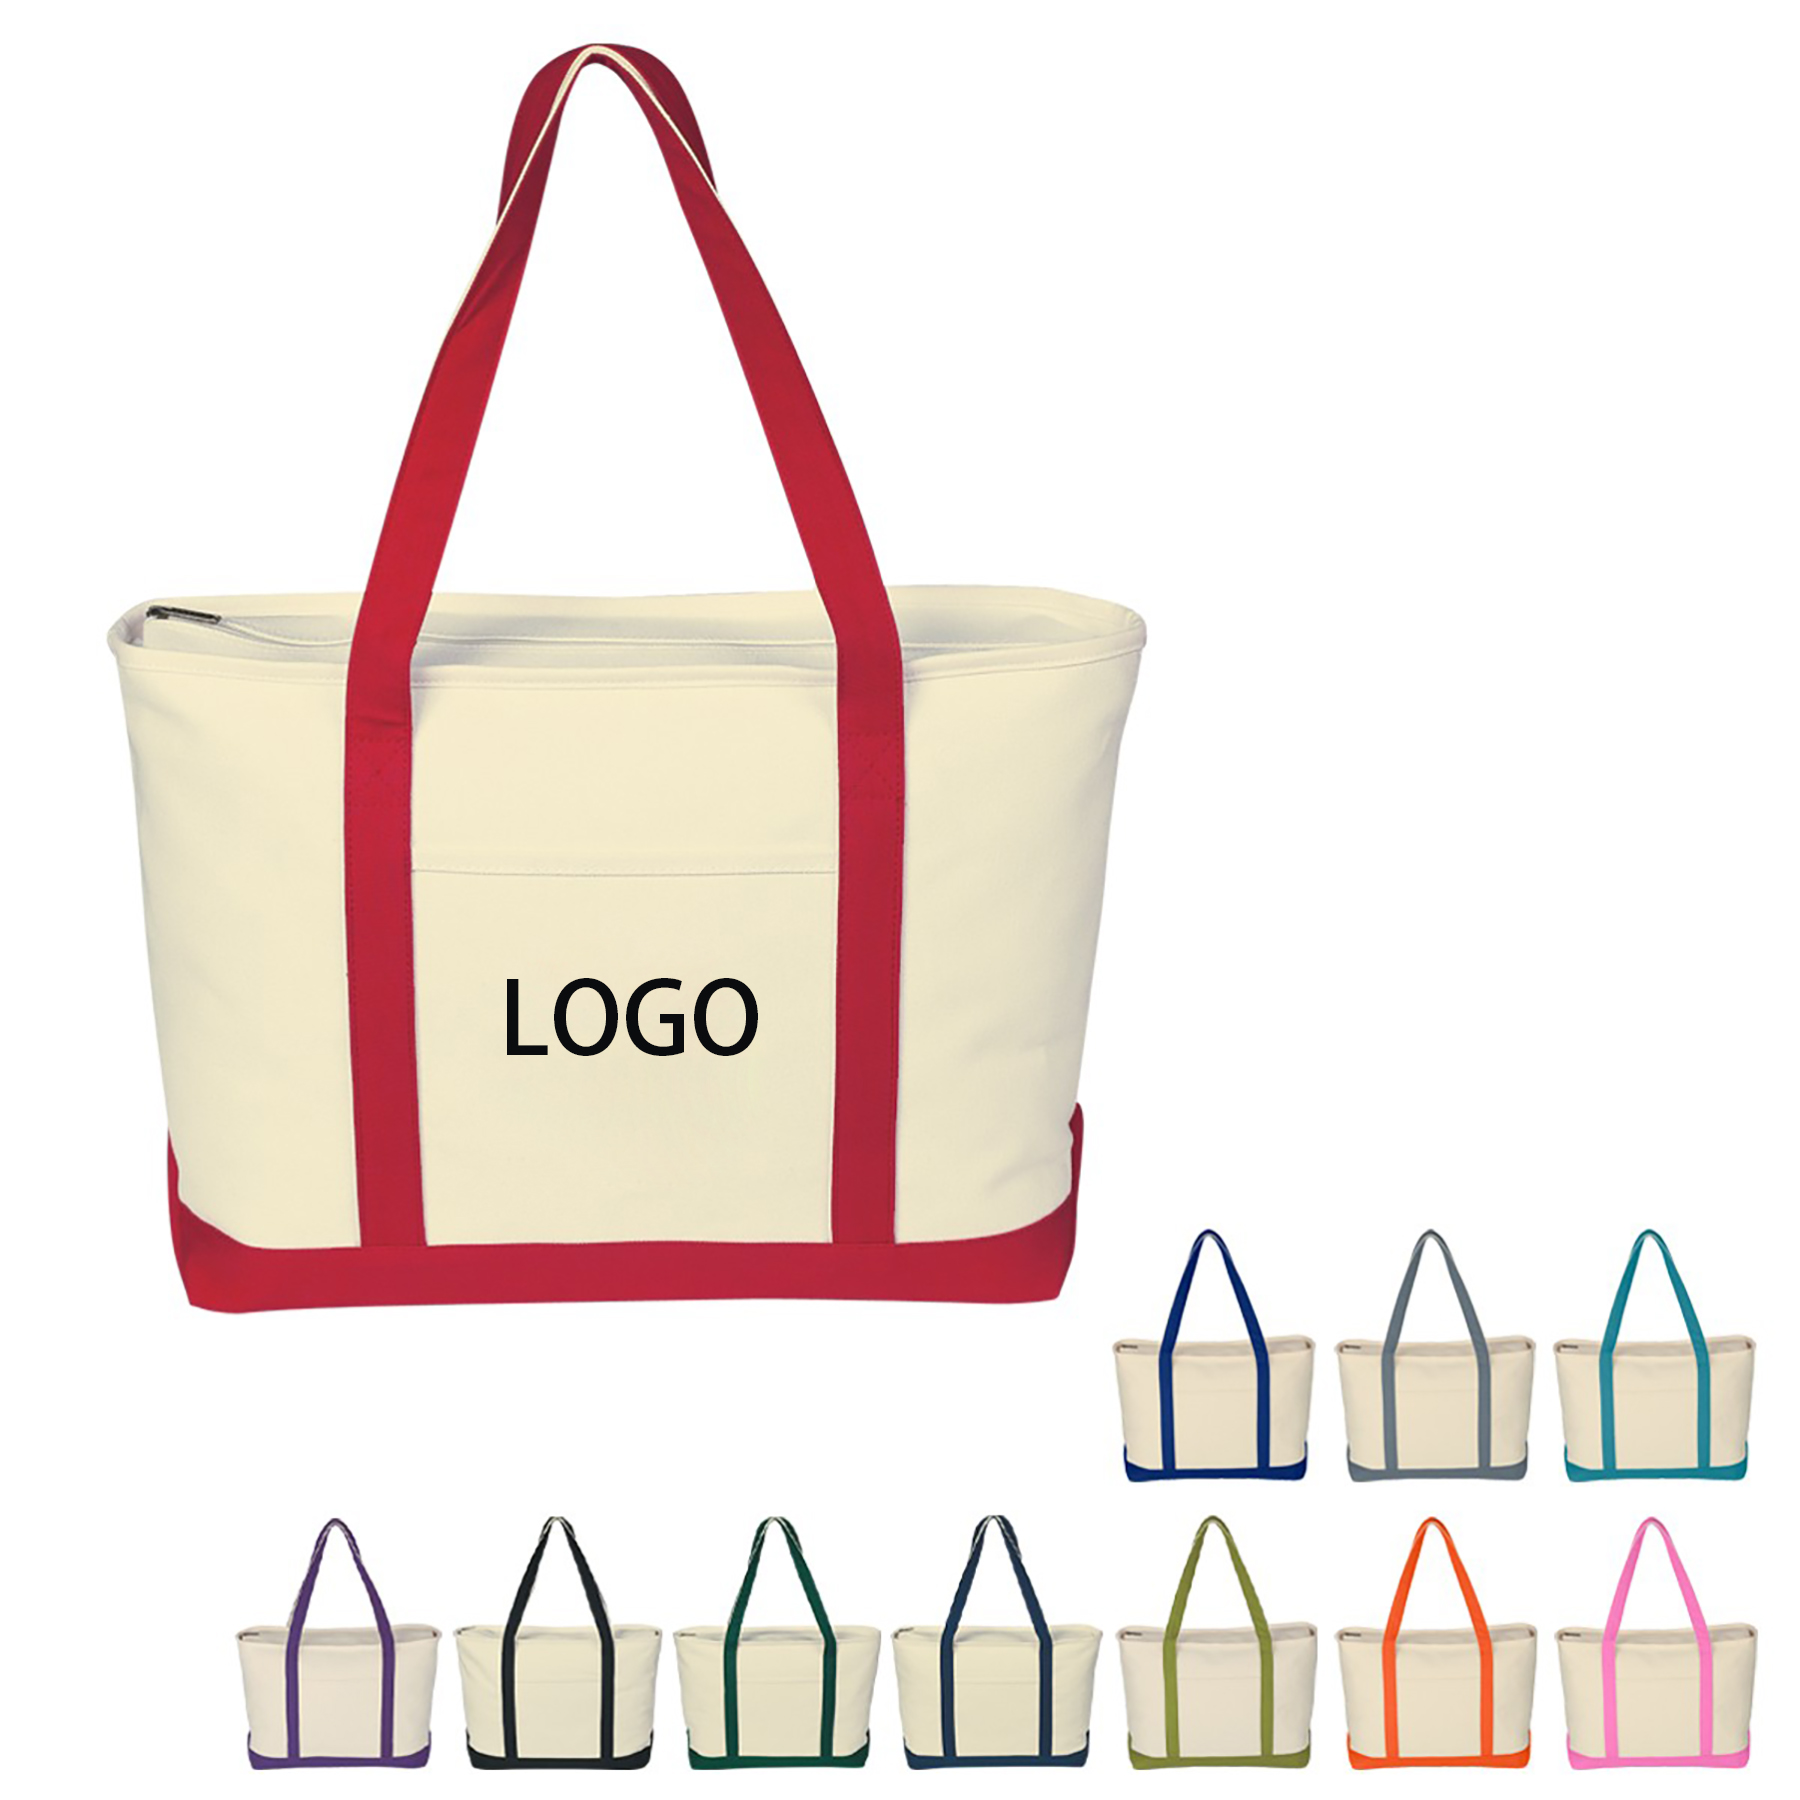 Canvas Tote Bag with an External Pocket